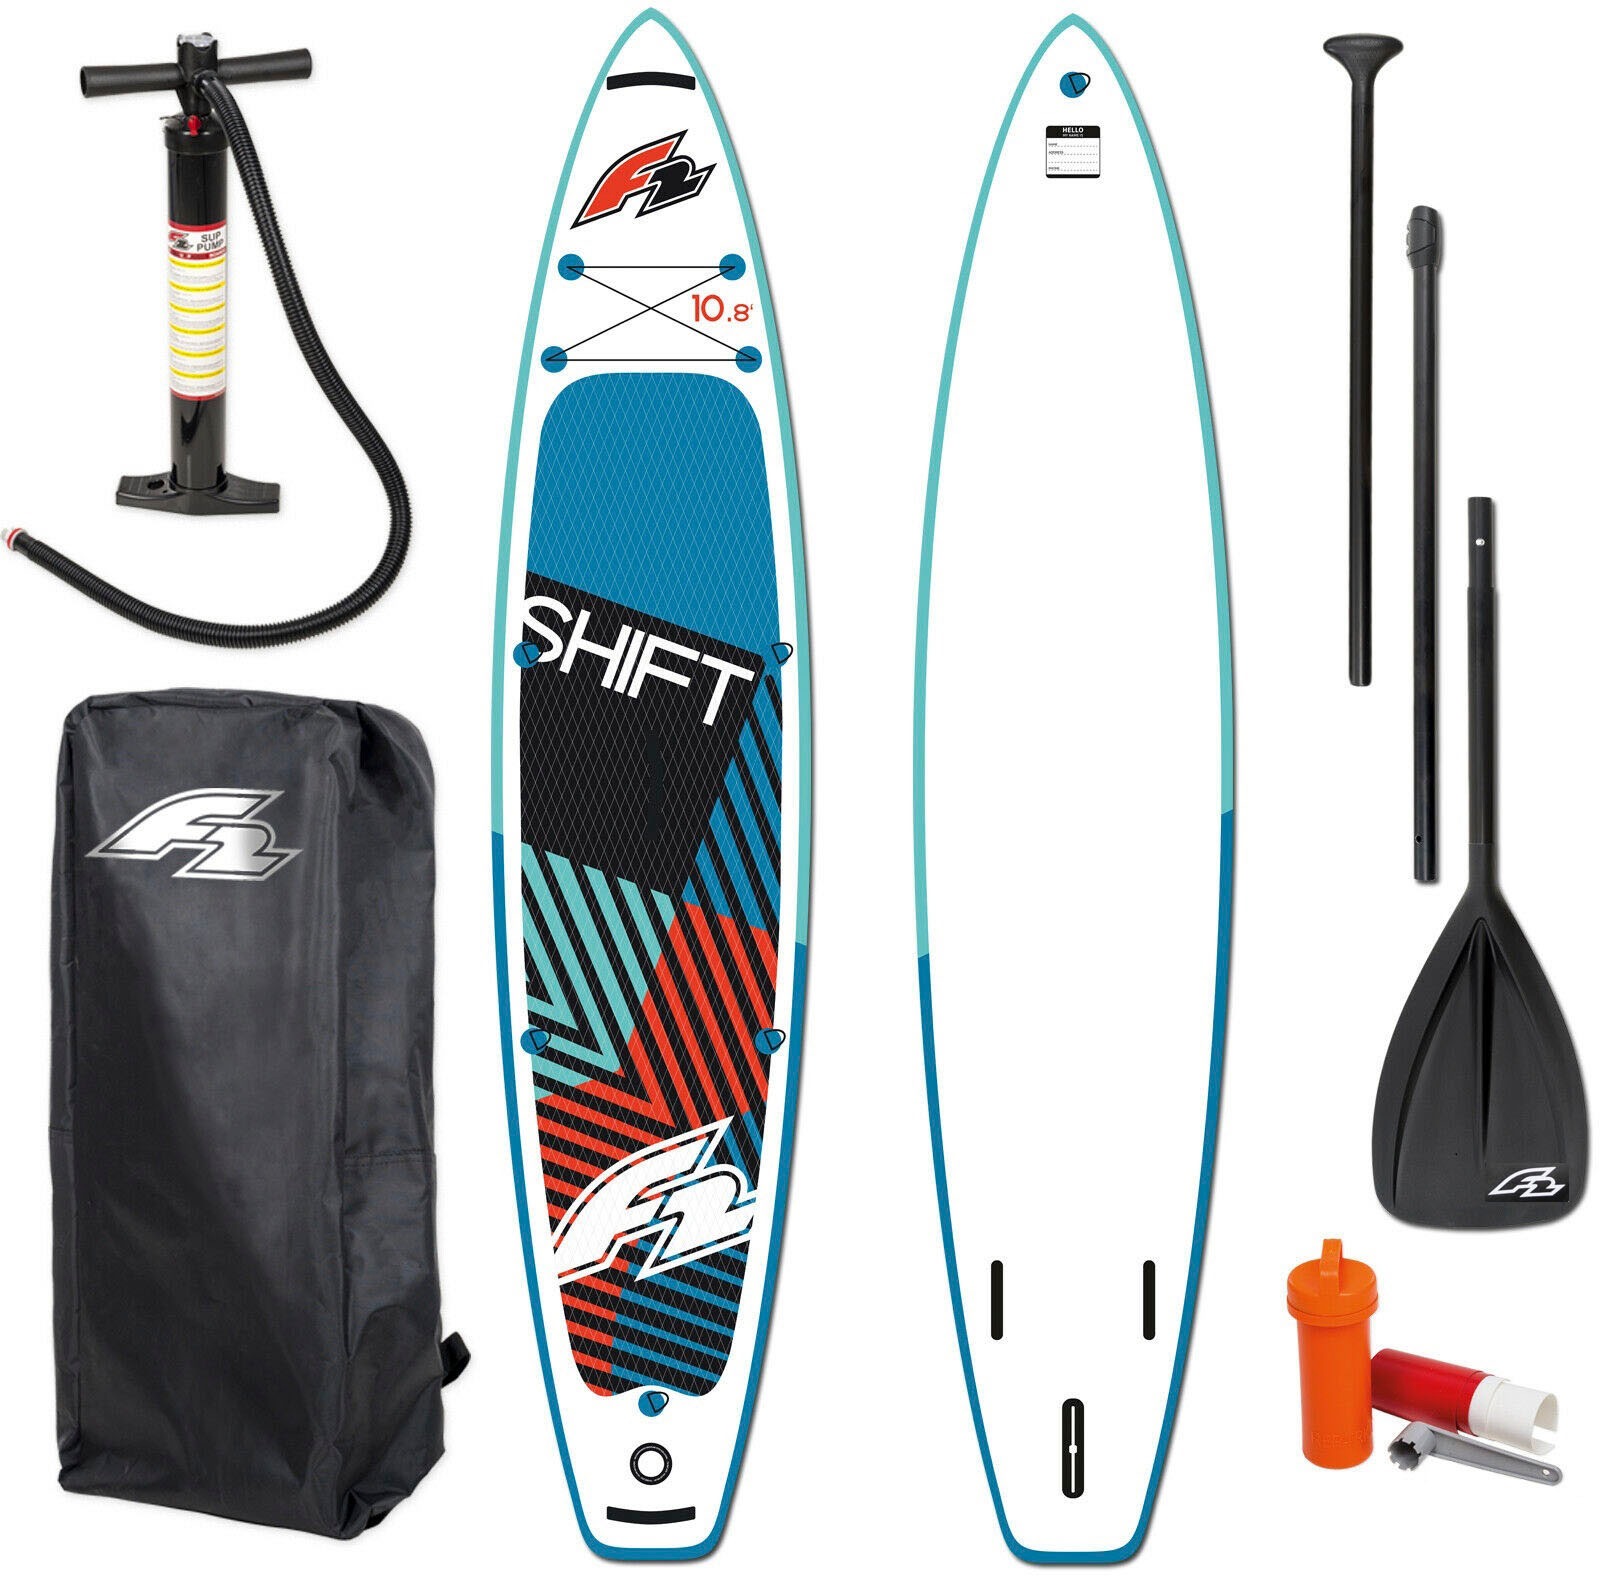 tlg.) im Shop 10,8«, SUP-Board 5 Inflatable Online F2 OTTO (Packung, »Shift